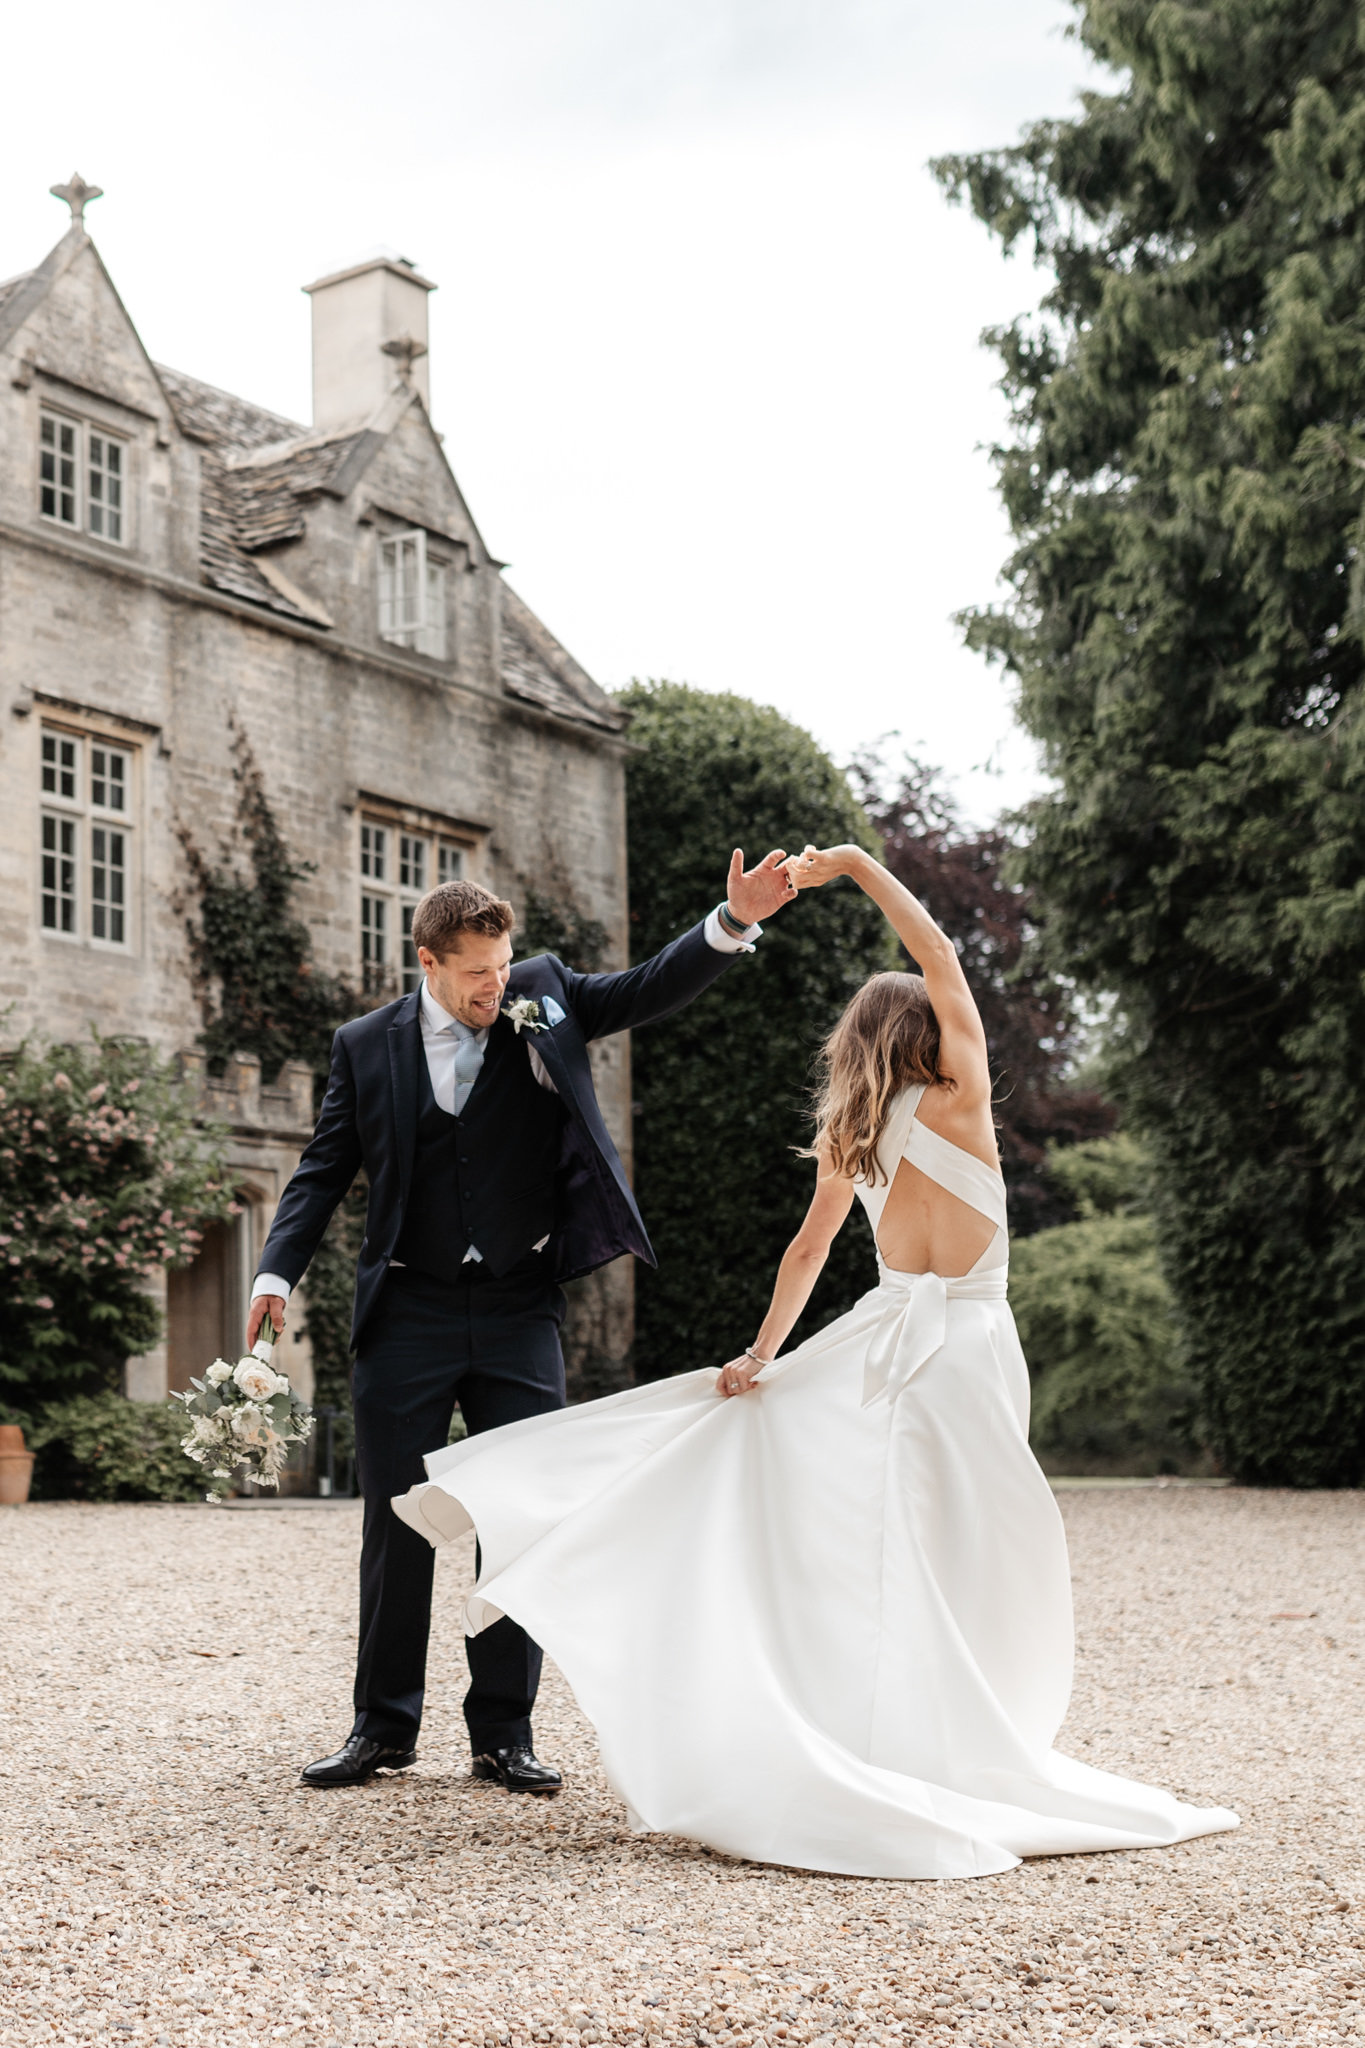 bride and groom dancing outside their wedding venue barnsley house in the cotswolds